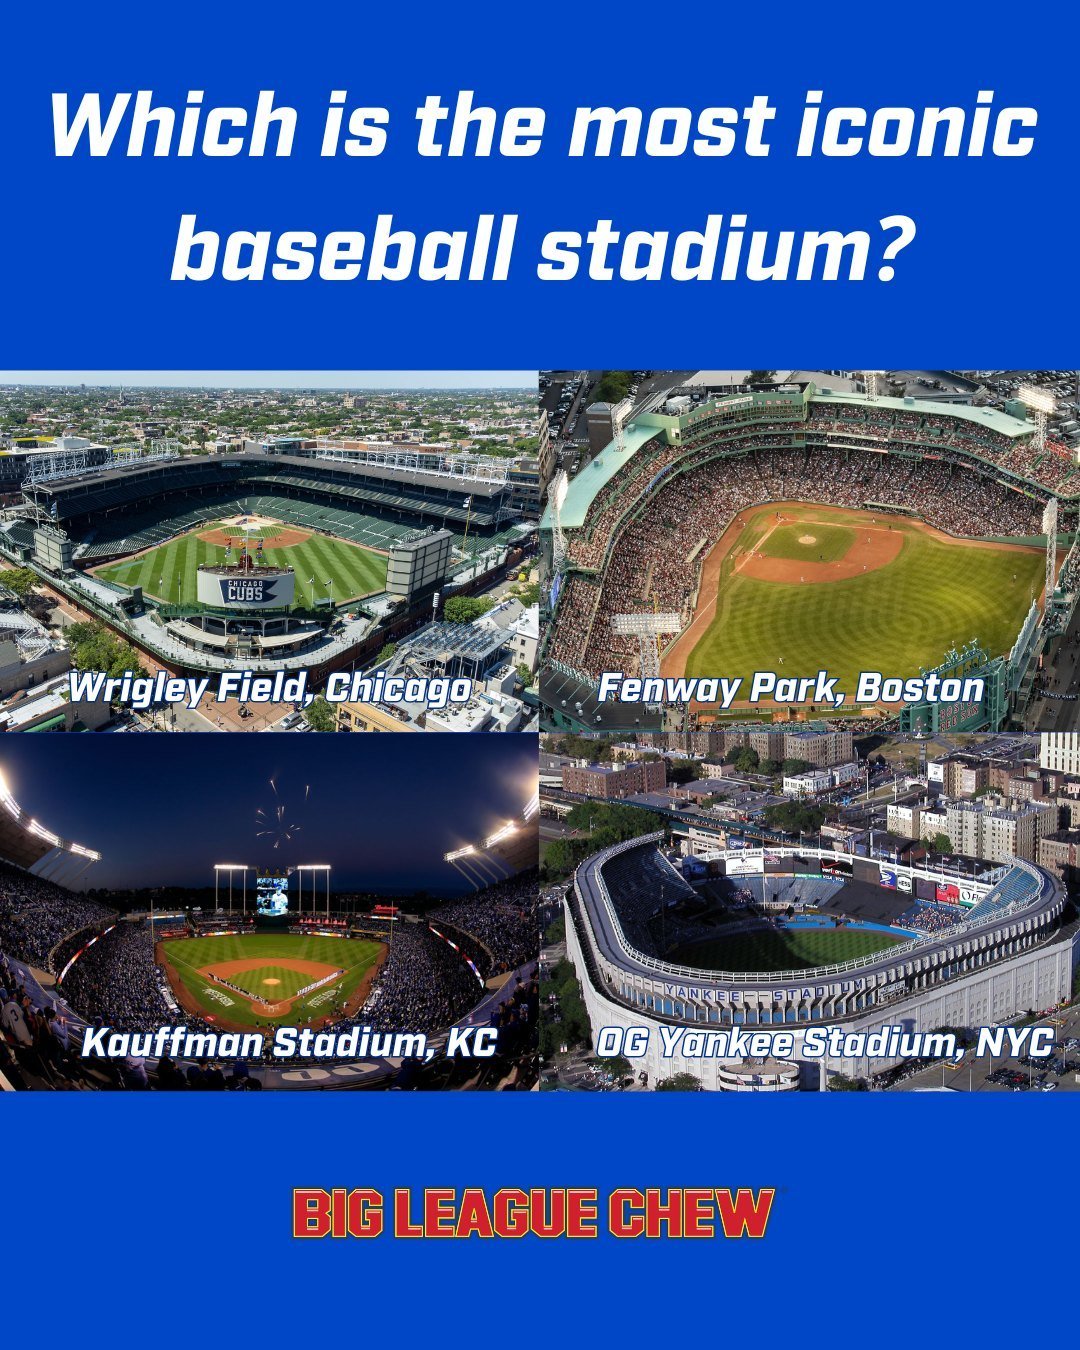 Have you gotten to visit any of these iconic ballparks?